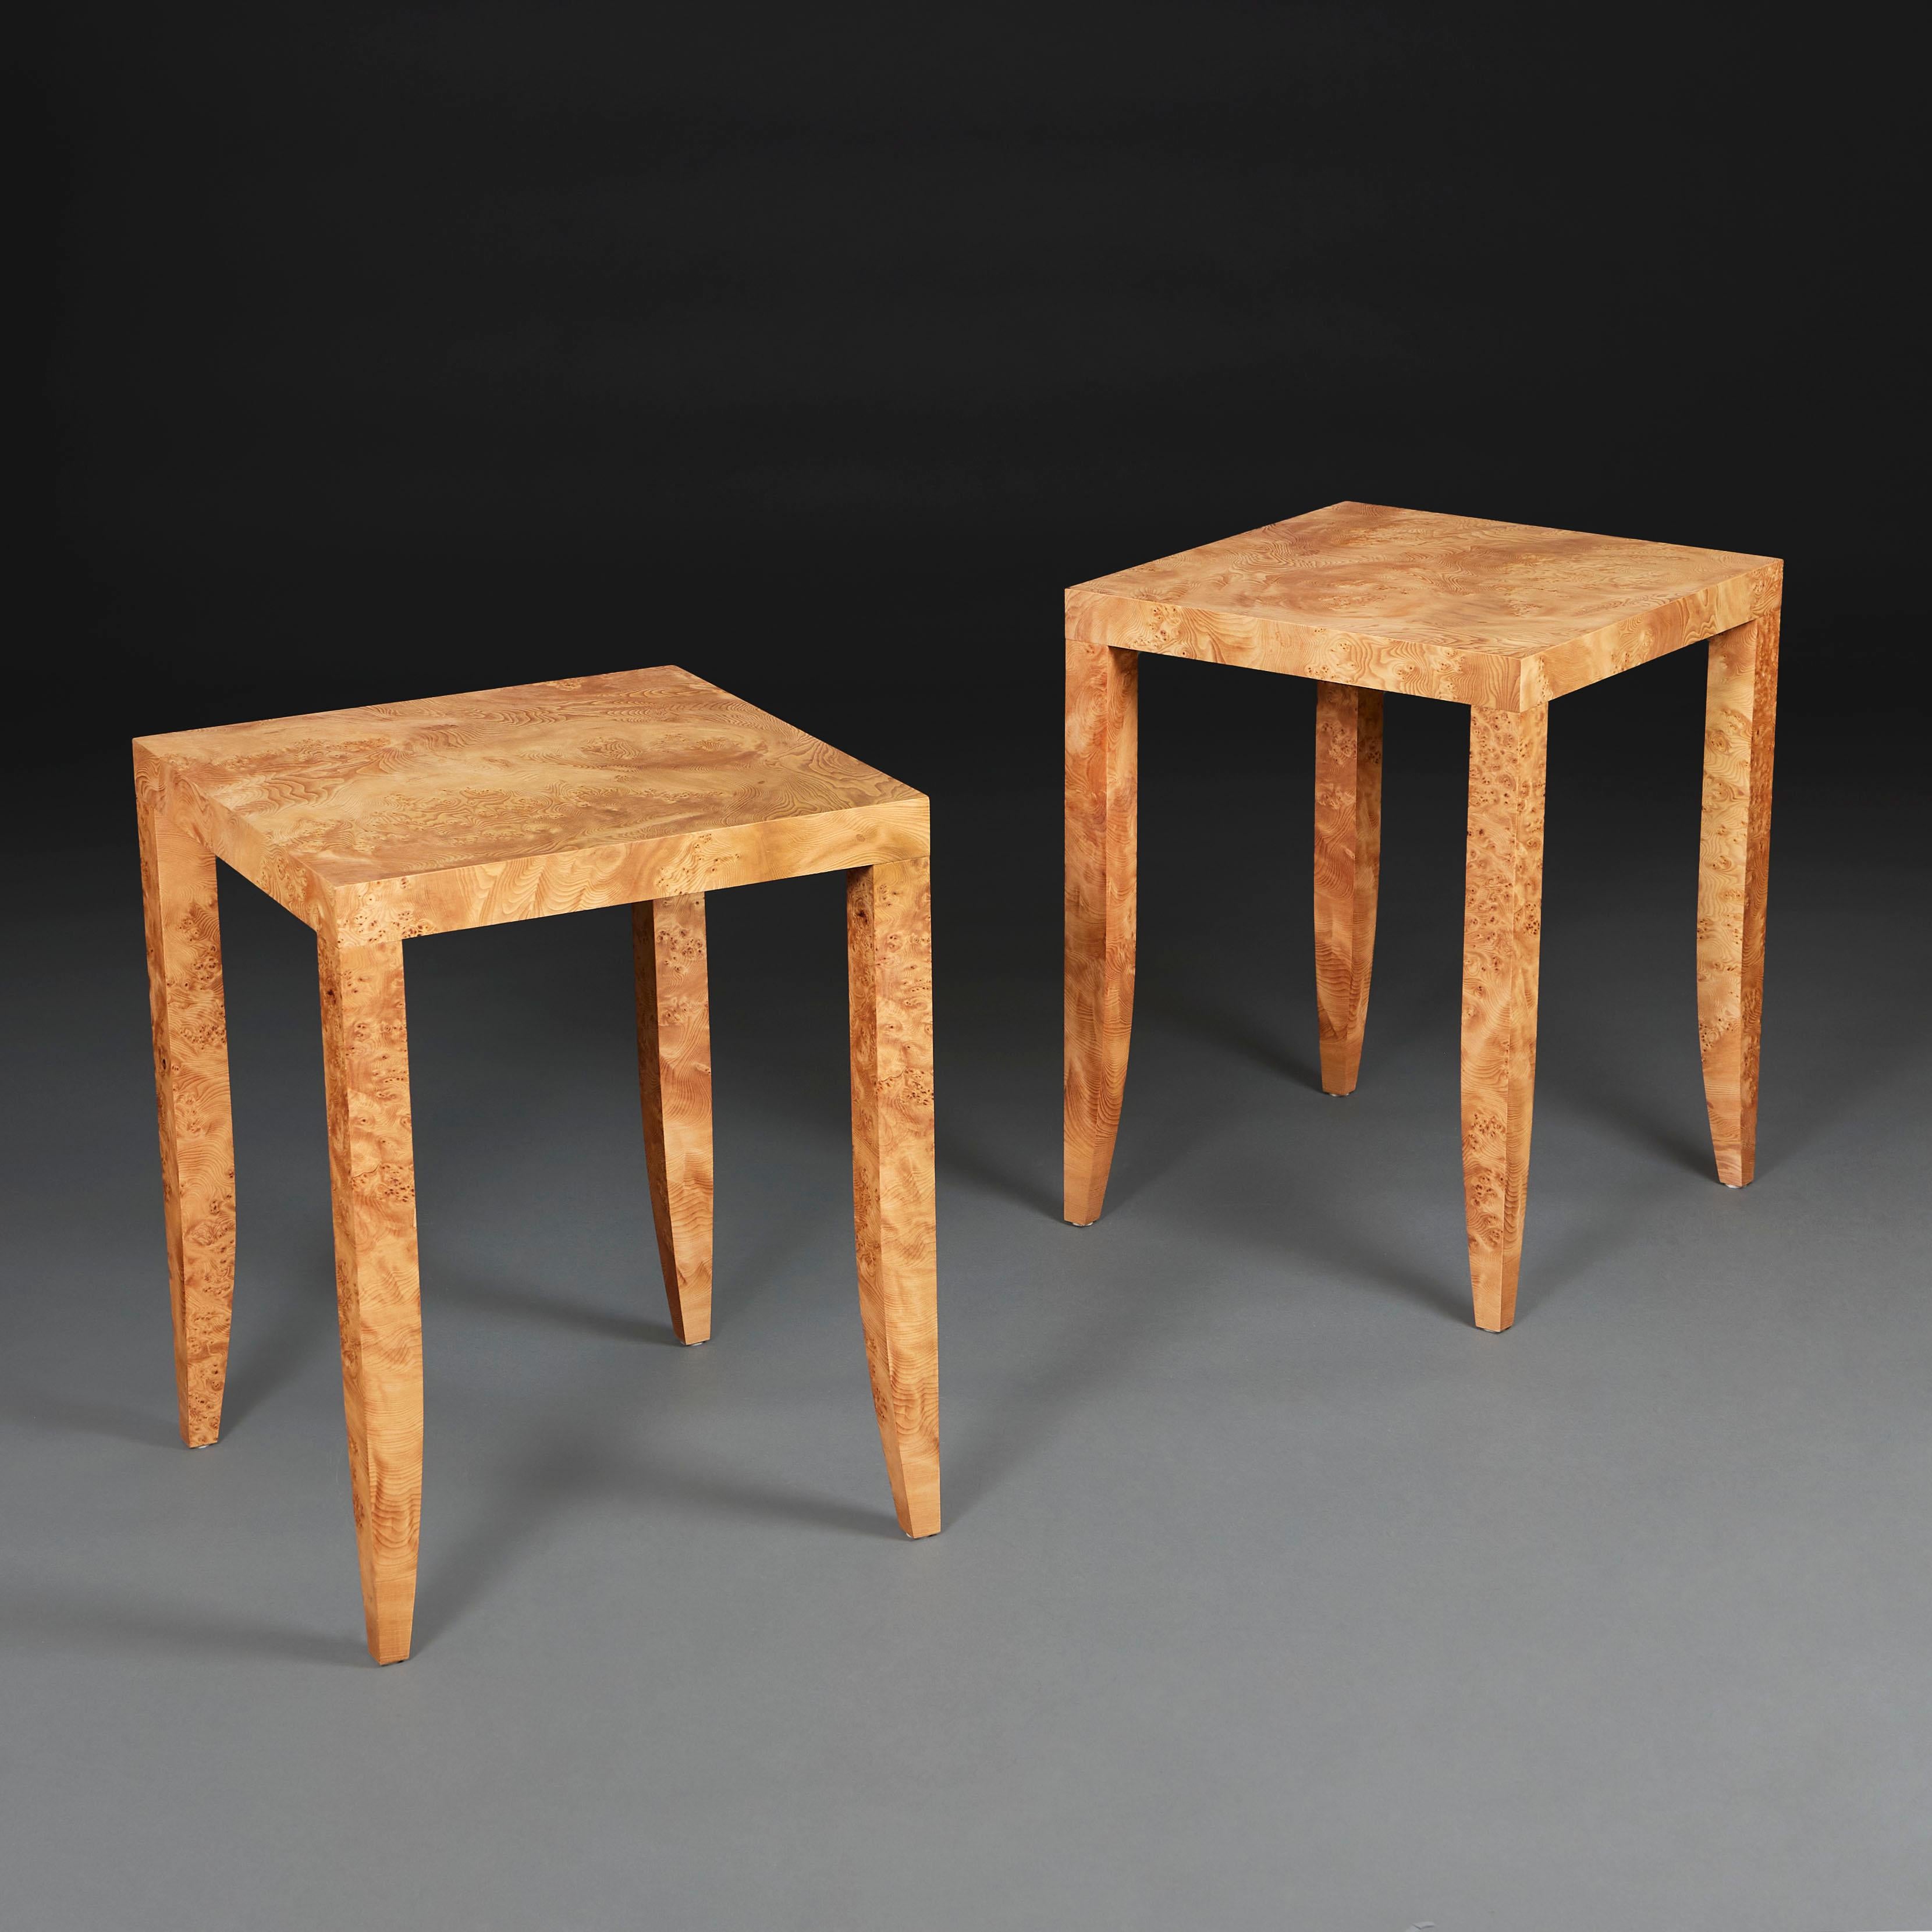 England, made to order.

A pair of square occasional tables with tapering legs, the carcass timber in ash and veneered in European fir burr wood with a natural matte finish. 

Lead time: 6 - 8 weeks.

Height   61.00cm
Width    47.00cm
Depth   